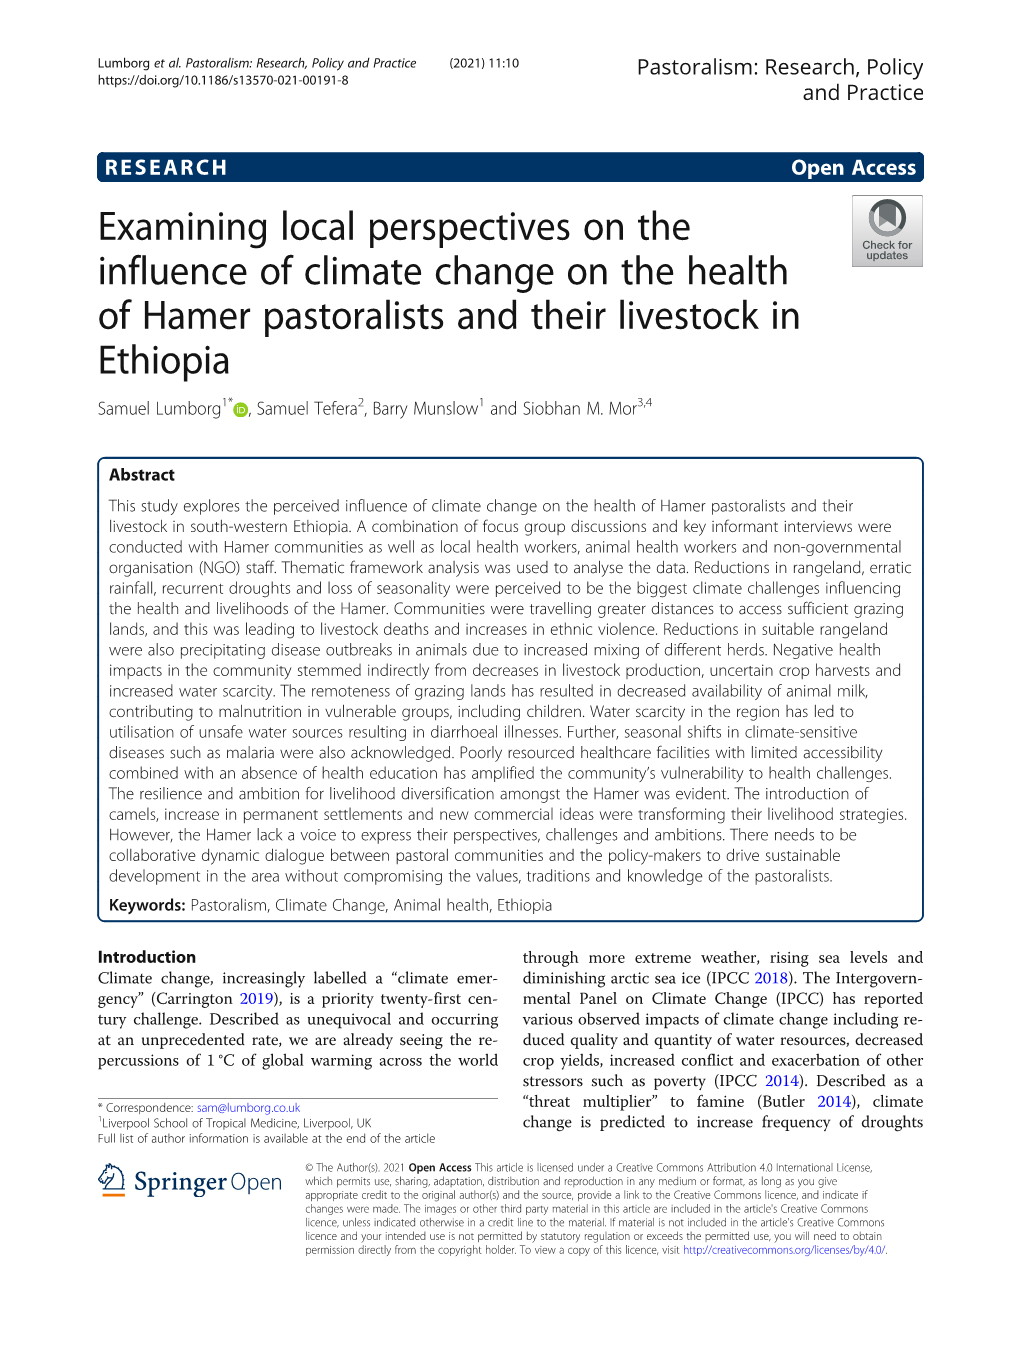 Examining Local Perspectives on the Influence of Climate Change on the Health of Hamer Pastoralists and Their Livestock in Ethio